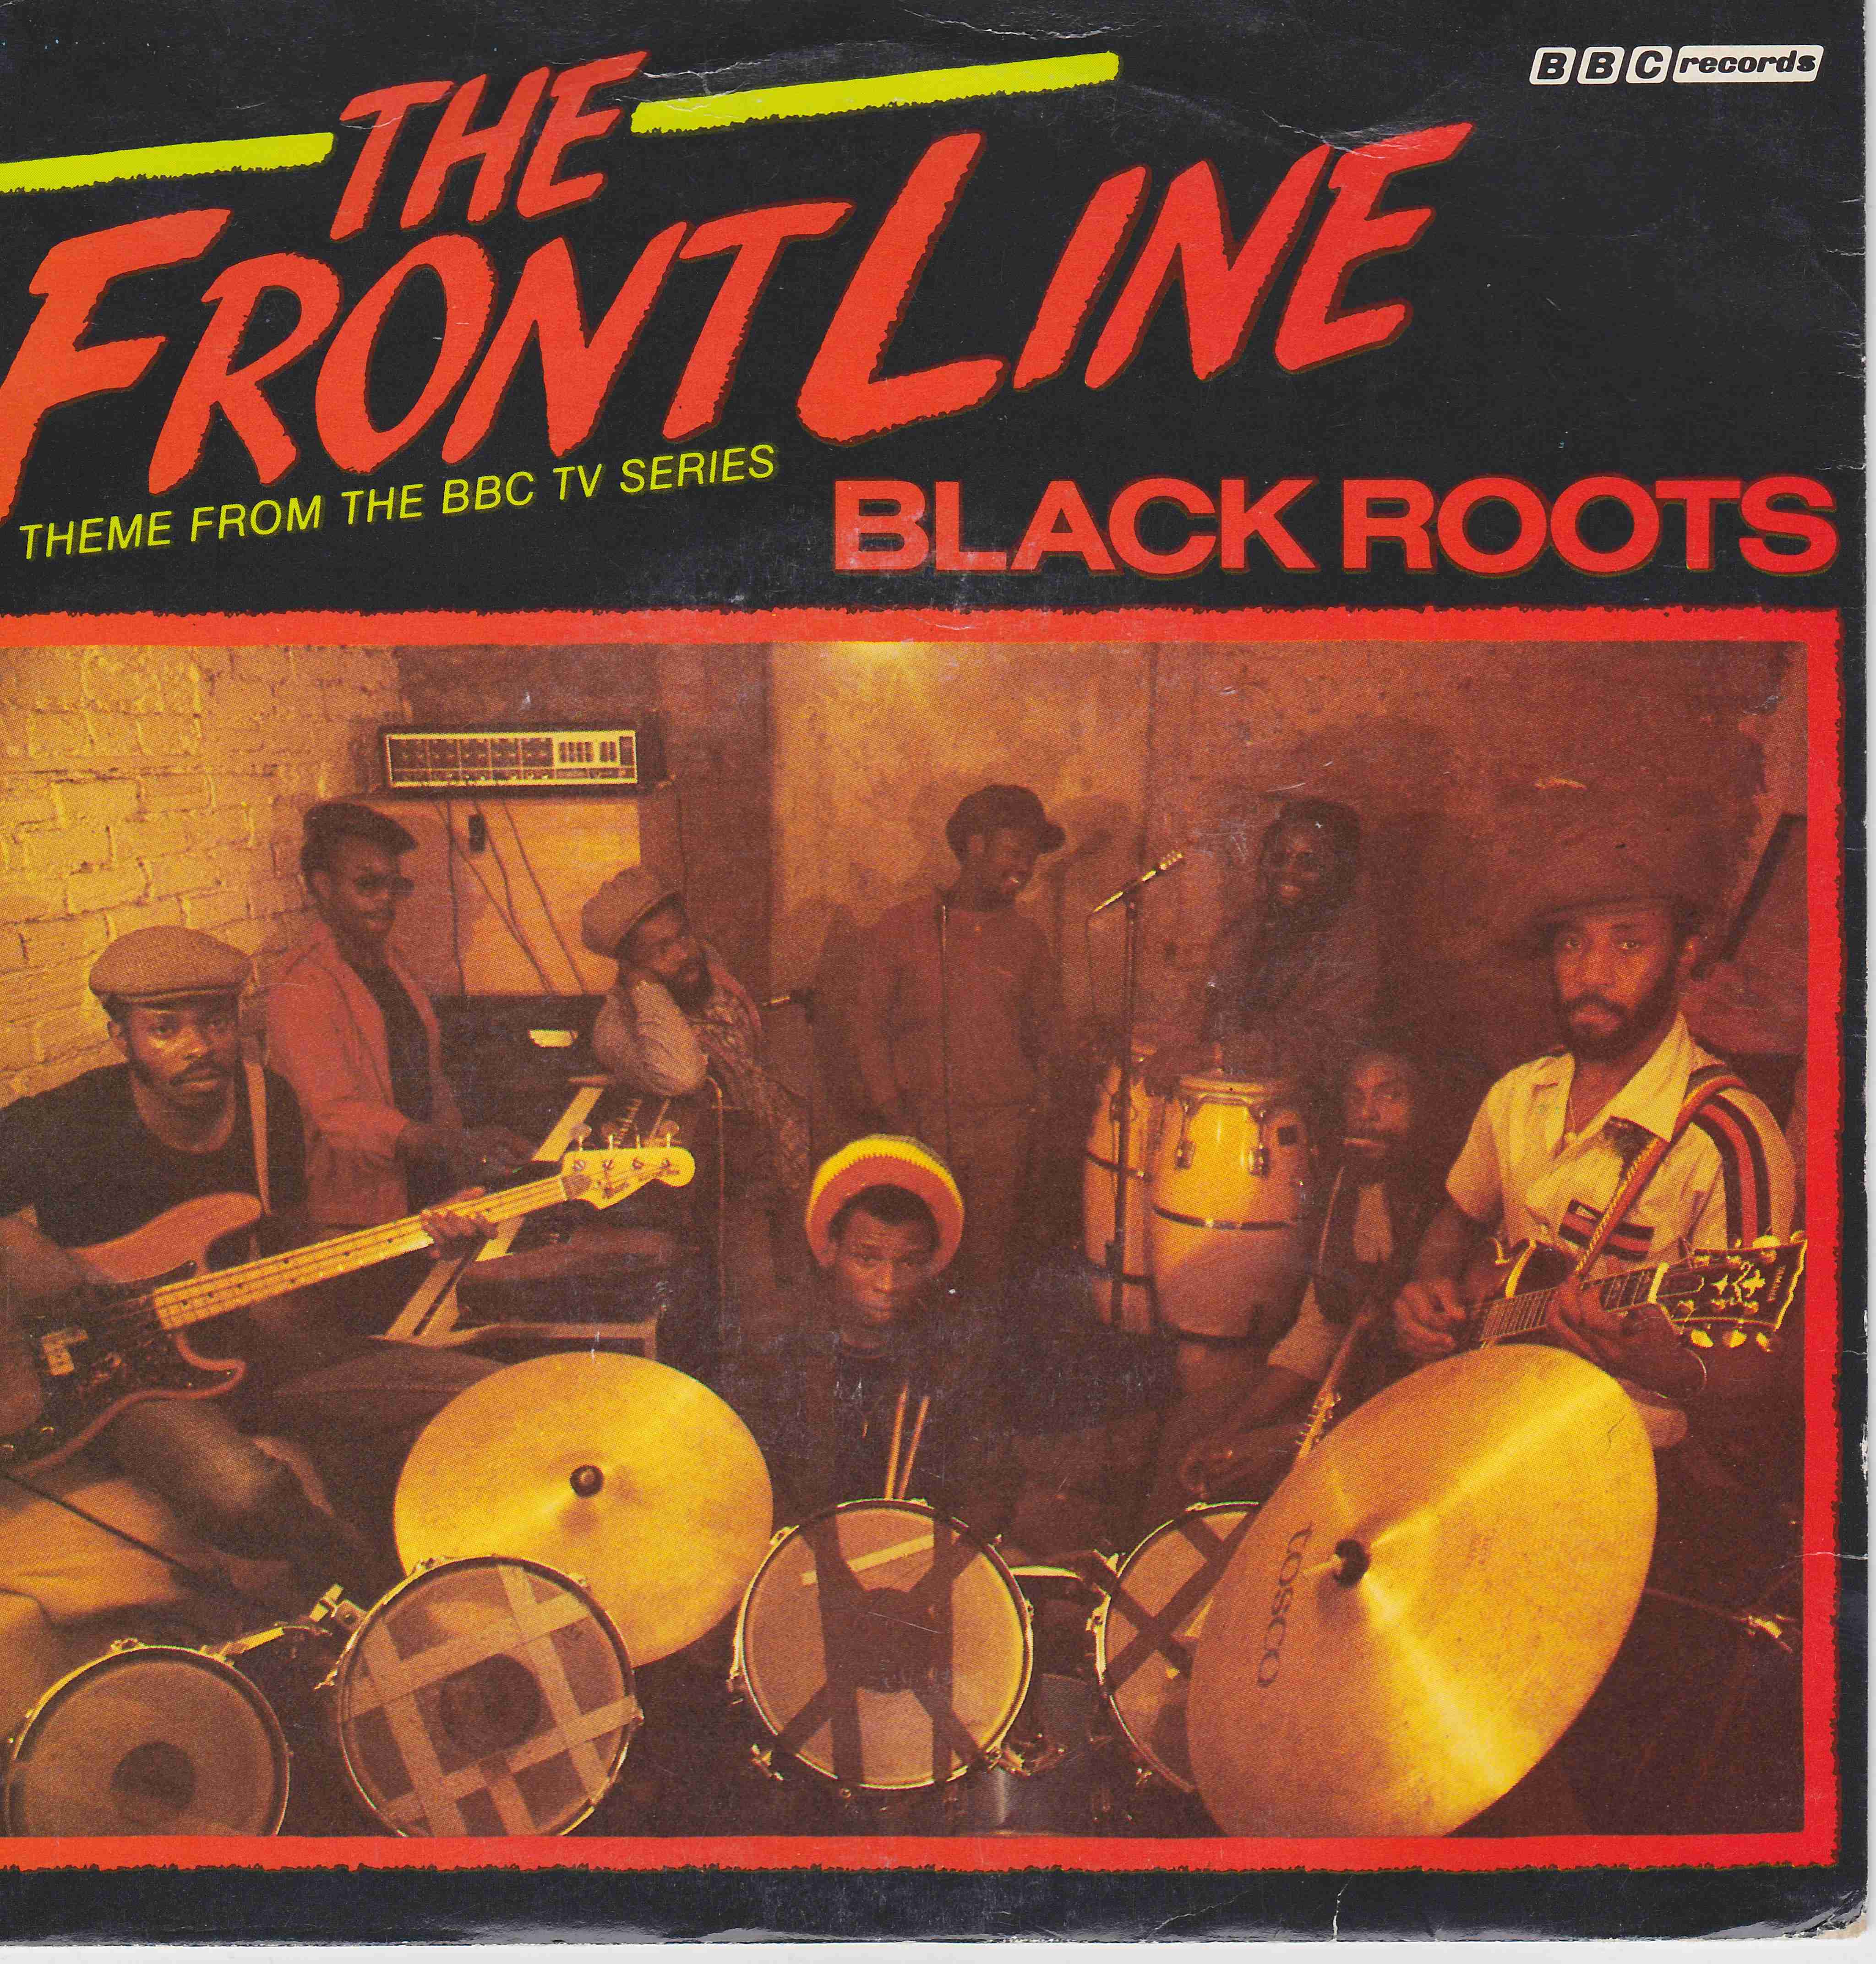 Picture of RESL 148 The front line single by artist Black Roots from the BBC records and Tapes library